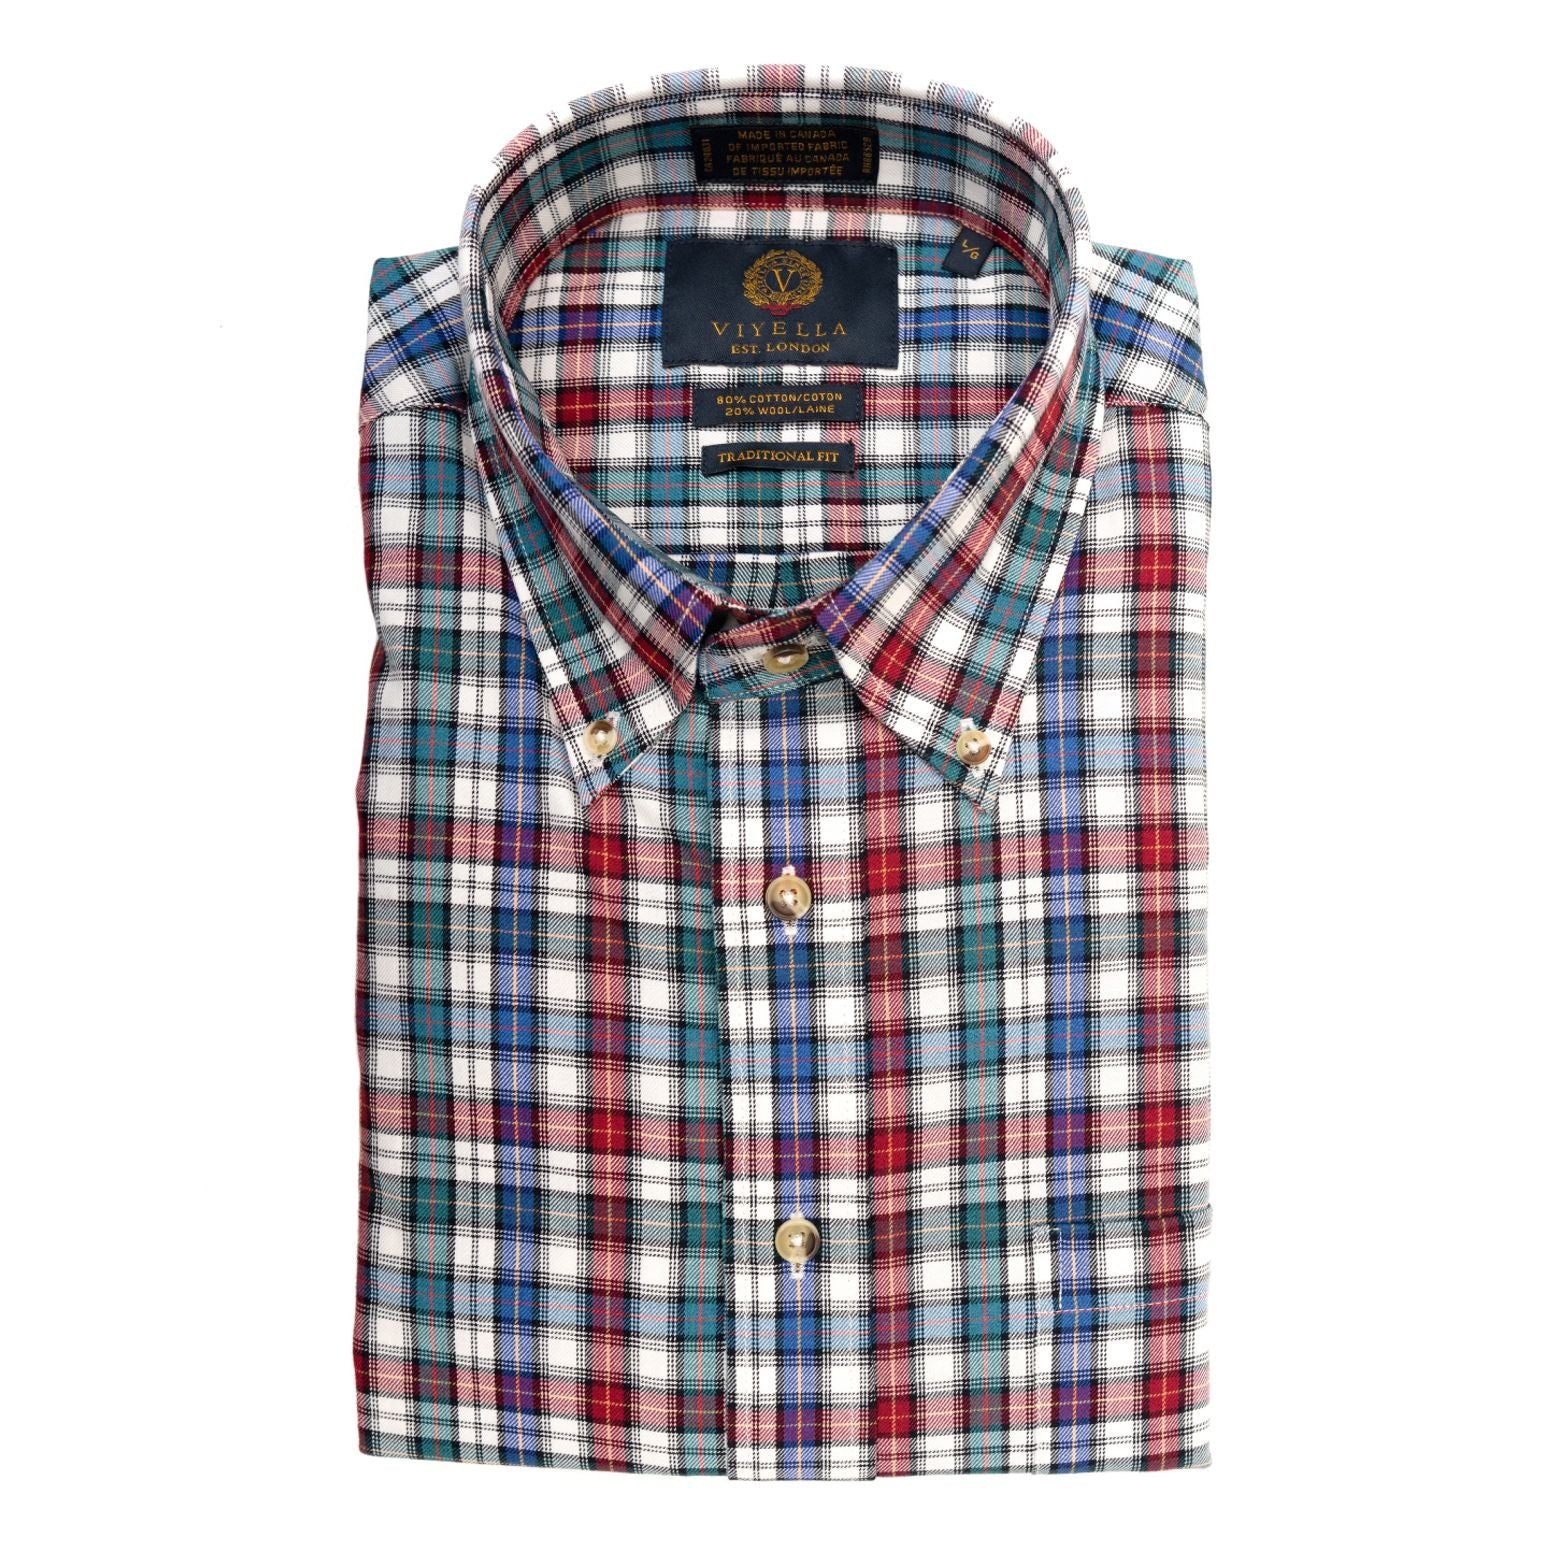 Blue, Aqua, and Red Plaid Cotton and Wool Blend Button-Down Shirt by Viyella